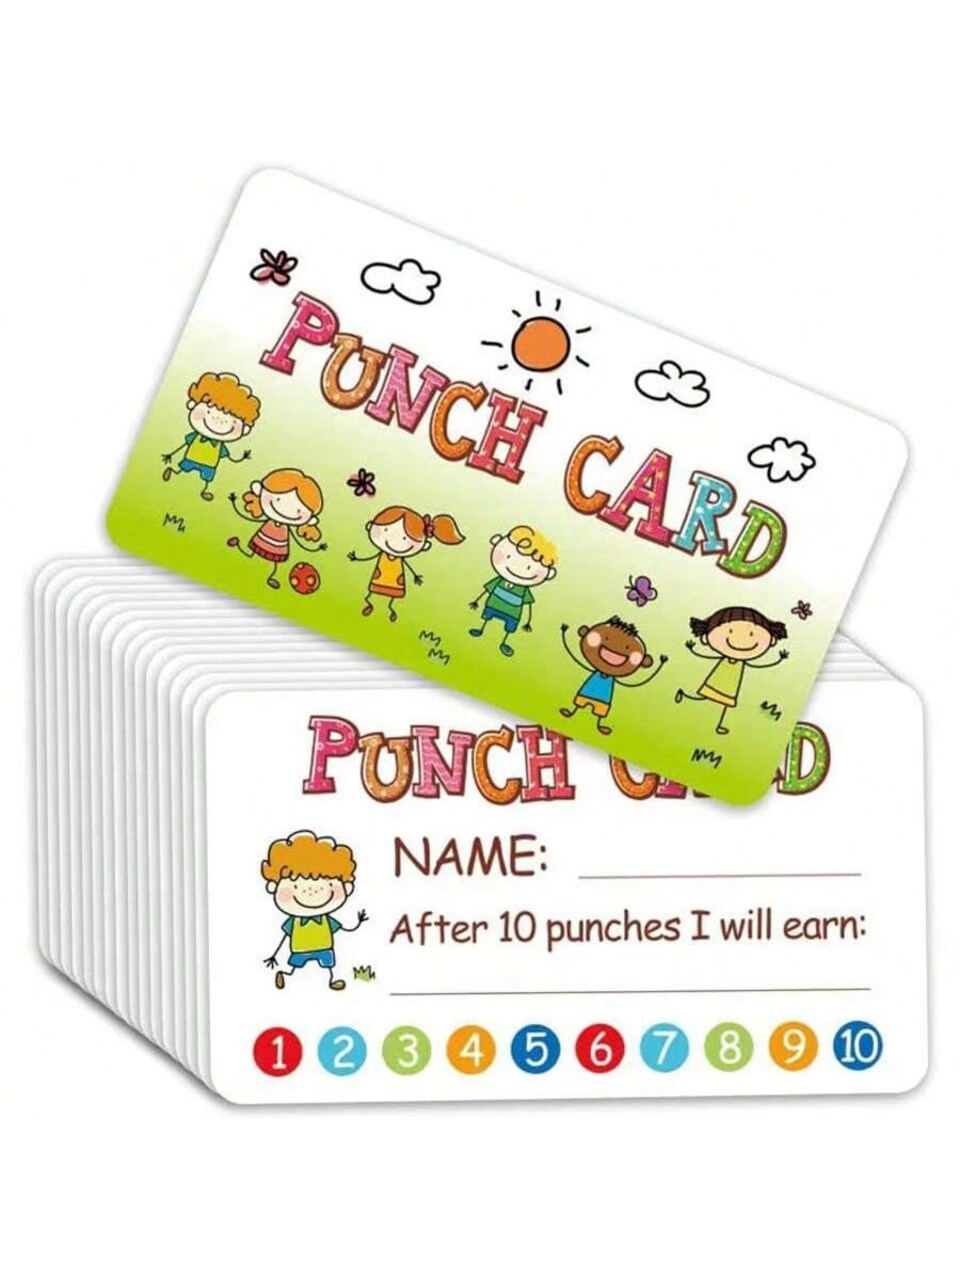 50Pcs Punch-Card Style Reward Cards for Classroom or Home Behavior  Motivation, Encouraging, Cute and Inspirational Gift, for Festivals,  Parties, Home Decor and Art Crafts